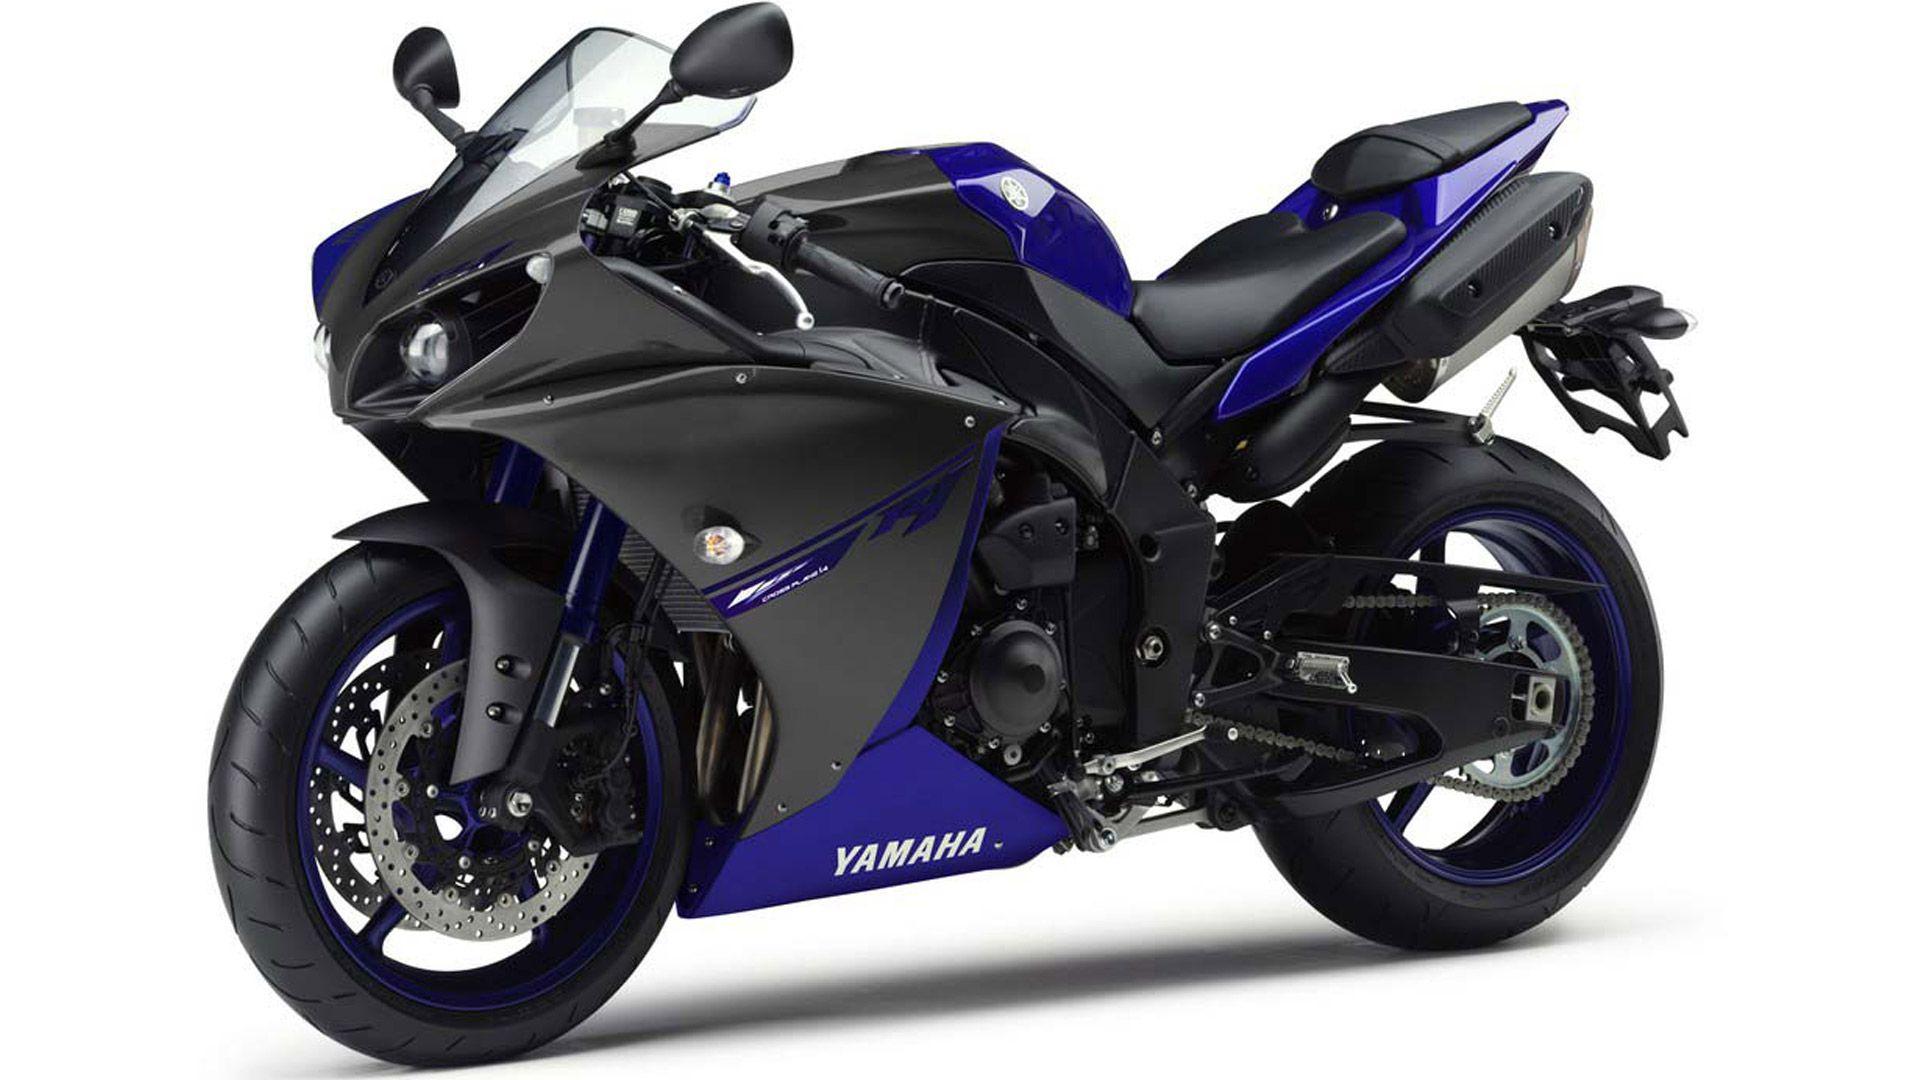 AMB Wallpaper Provides You The Latest Yamaha YZF R1 Wallpaper. We